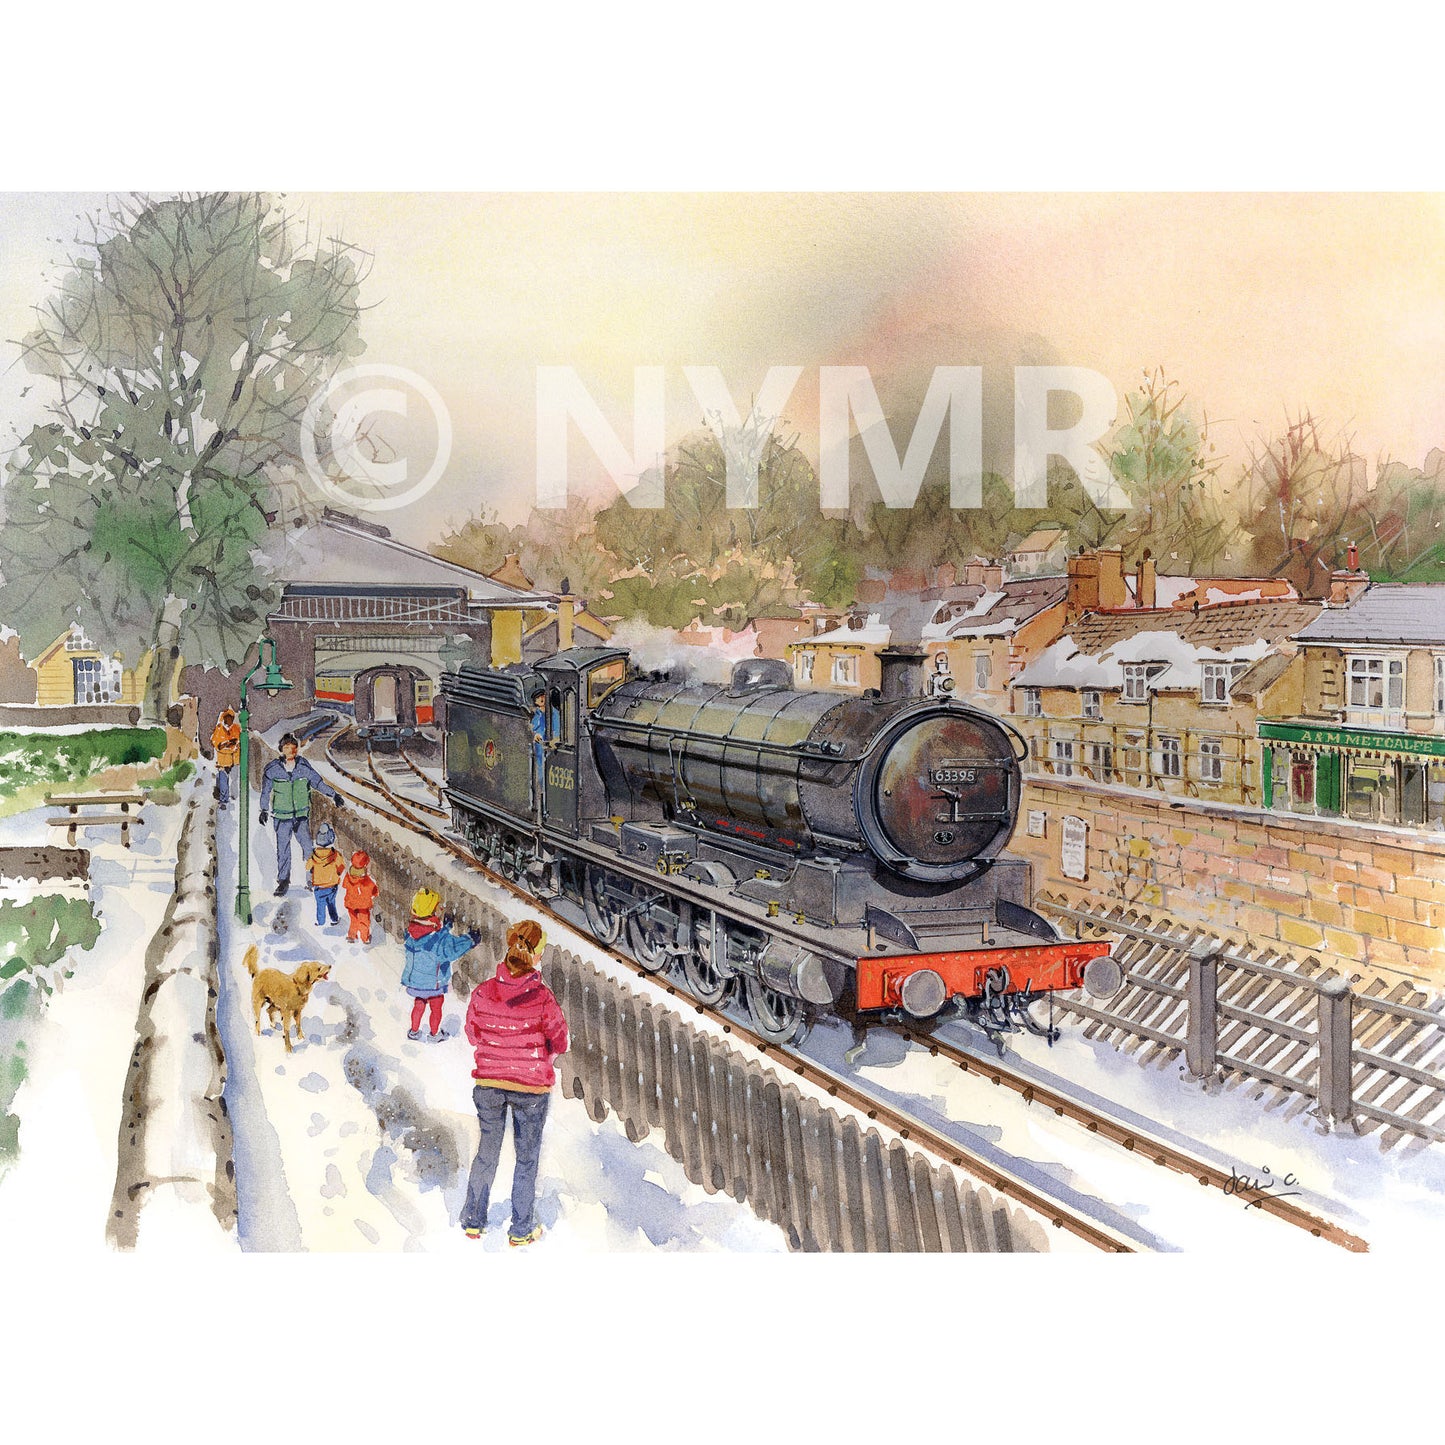 A Christmas card with a painting of LNER Q6 No 63395 at Pickering Station